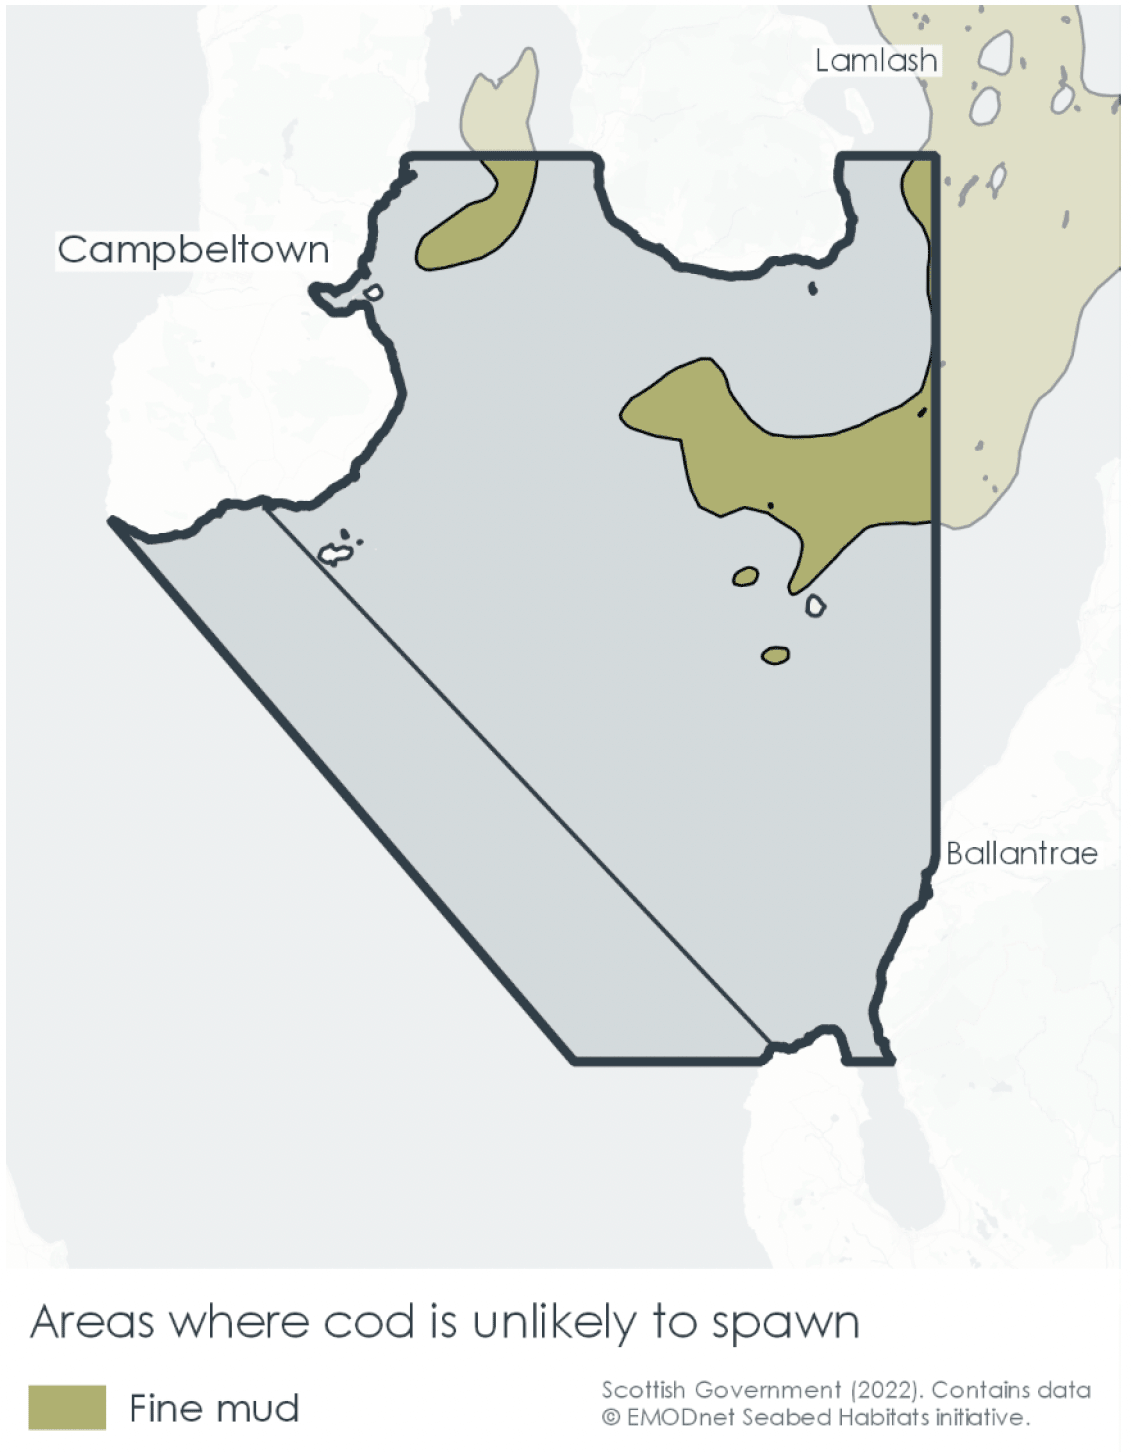 outline of areas where cod are unlikely to spawn within the 2002-2021 Clyde Cod Box area, focusing on areas of fine mud 